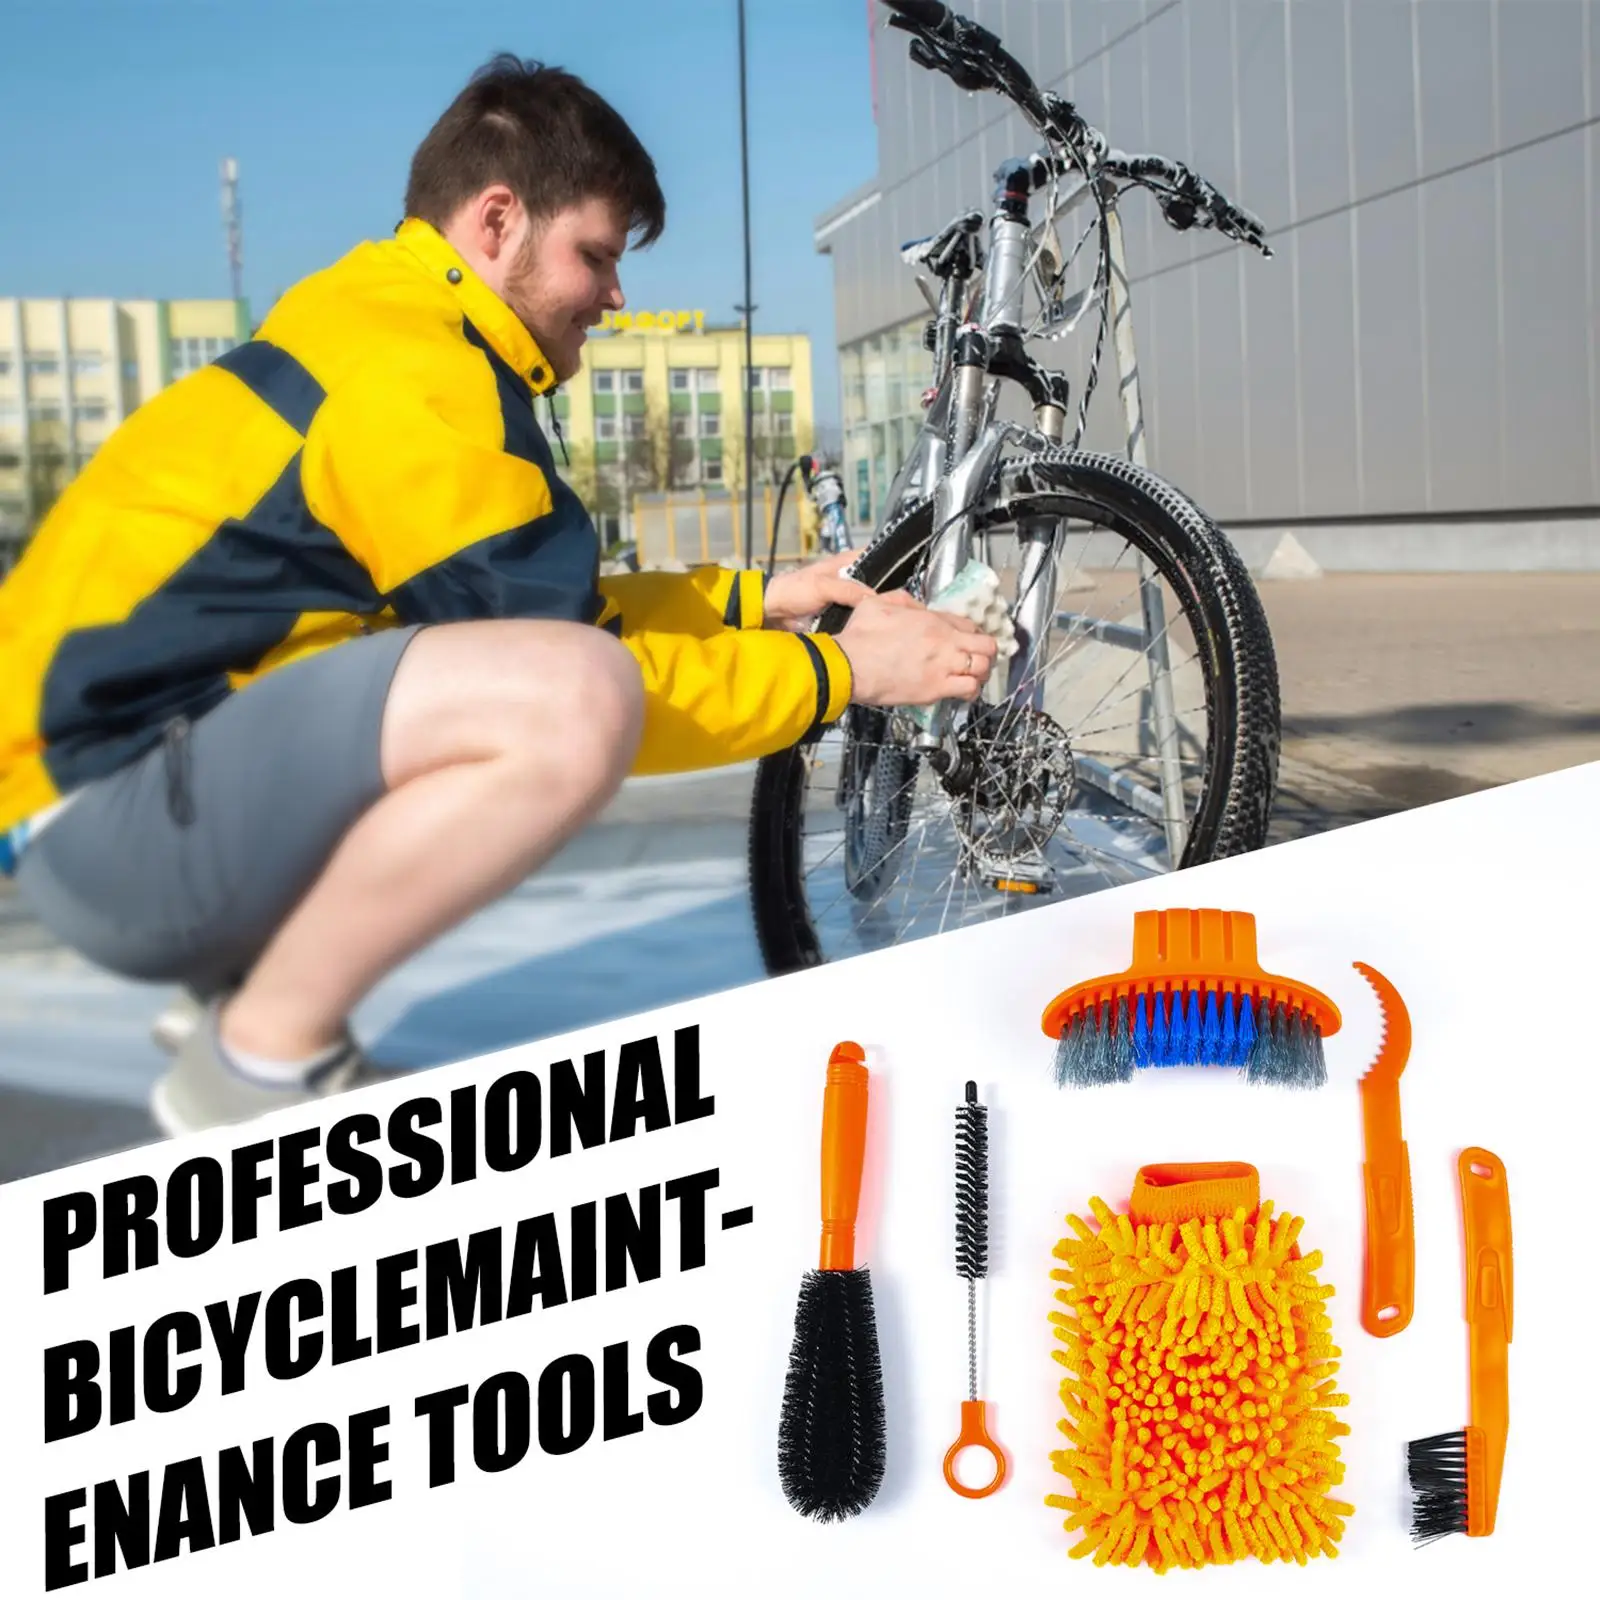 Bicycle Chain Cleaner City Bike Cleaning Kit Tire Scrubber for Crank Chain